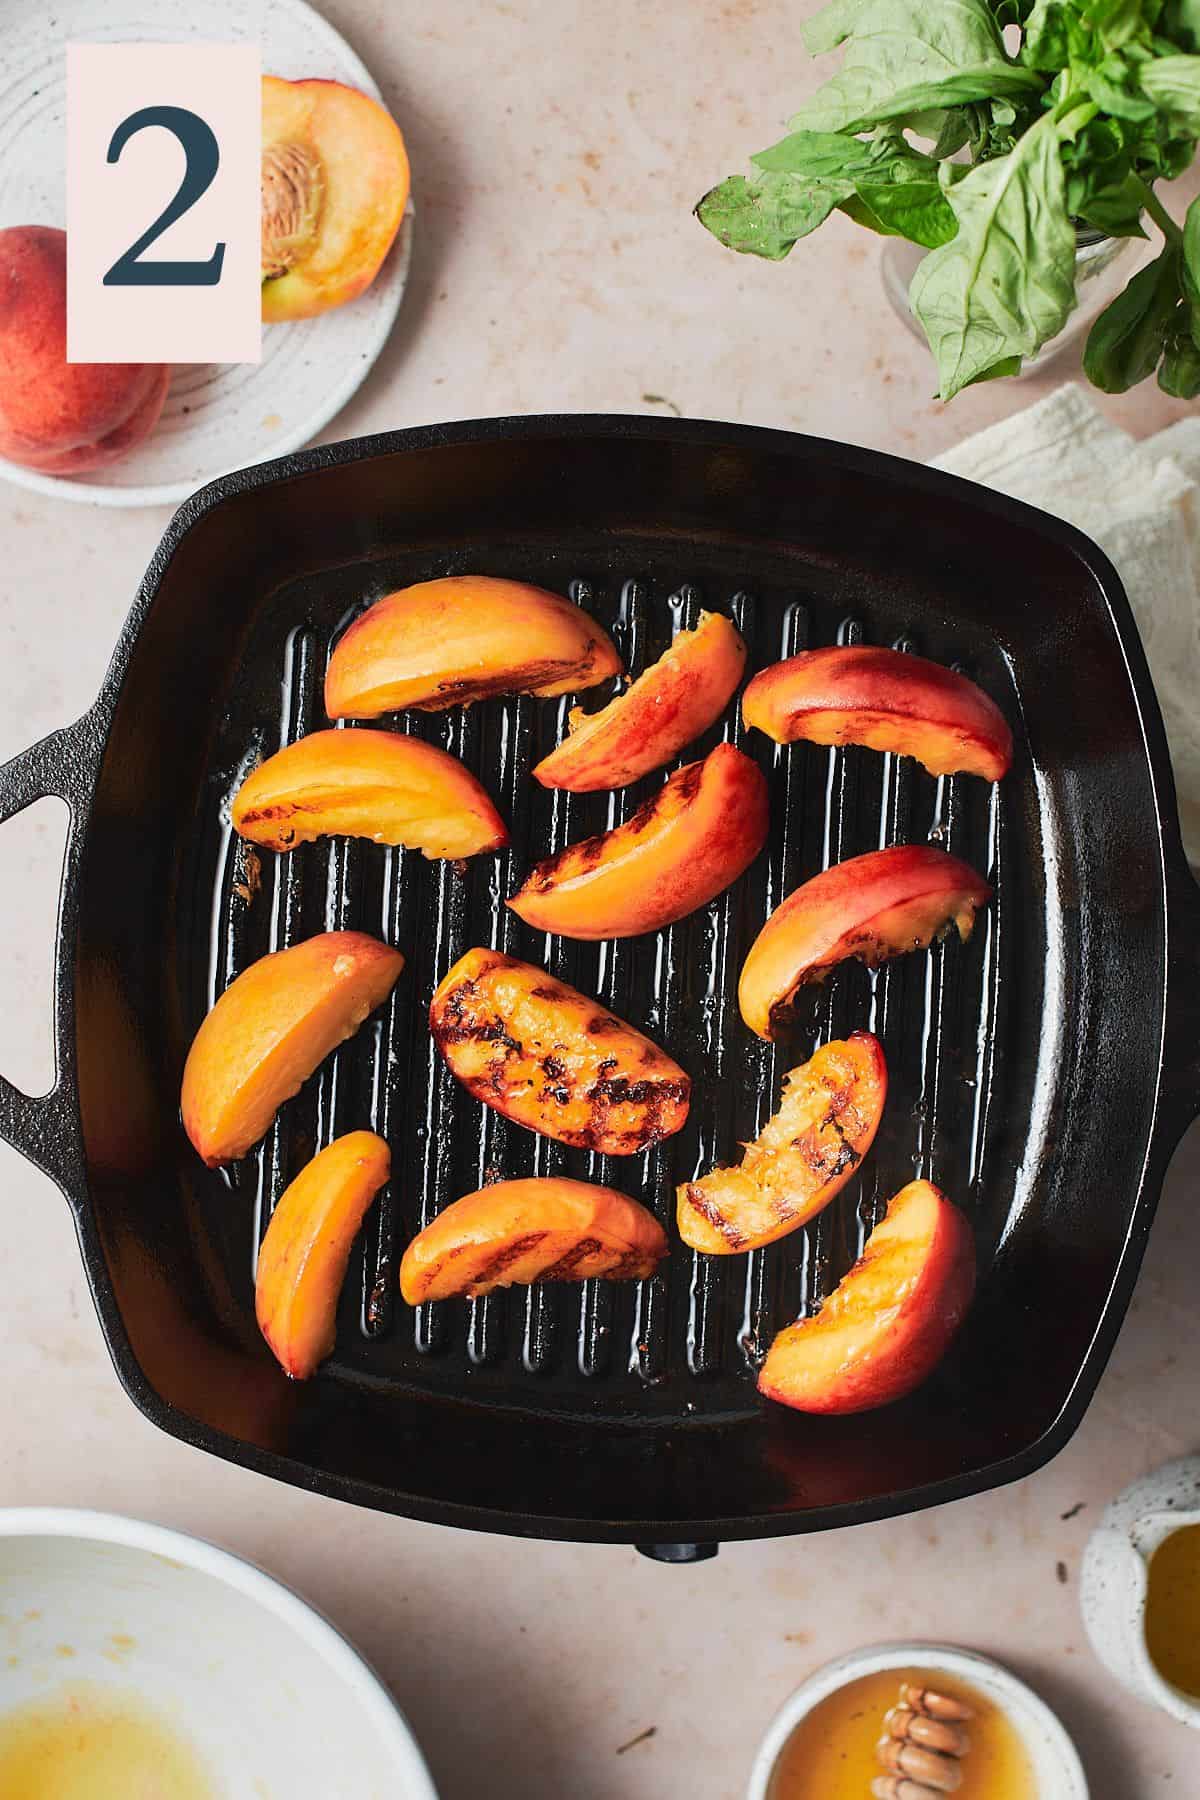 Grilling peaches on a hot griddle pan to achieve grill marks.